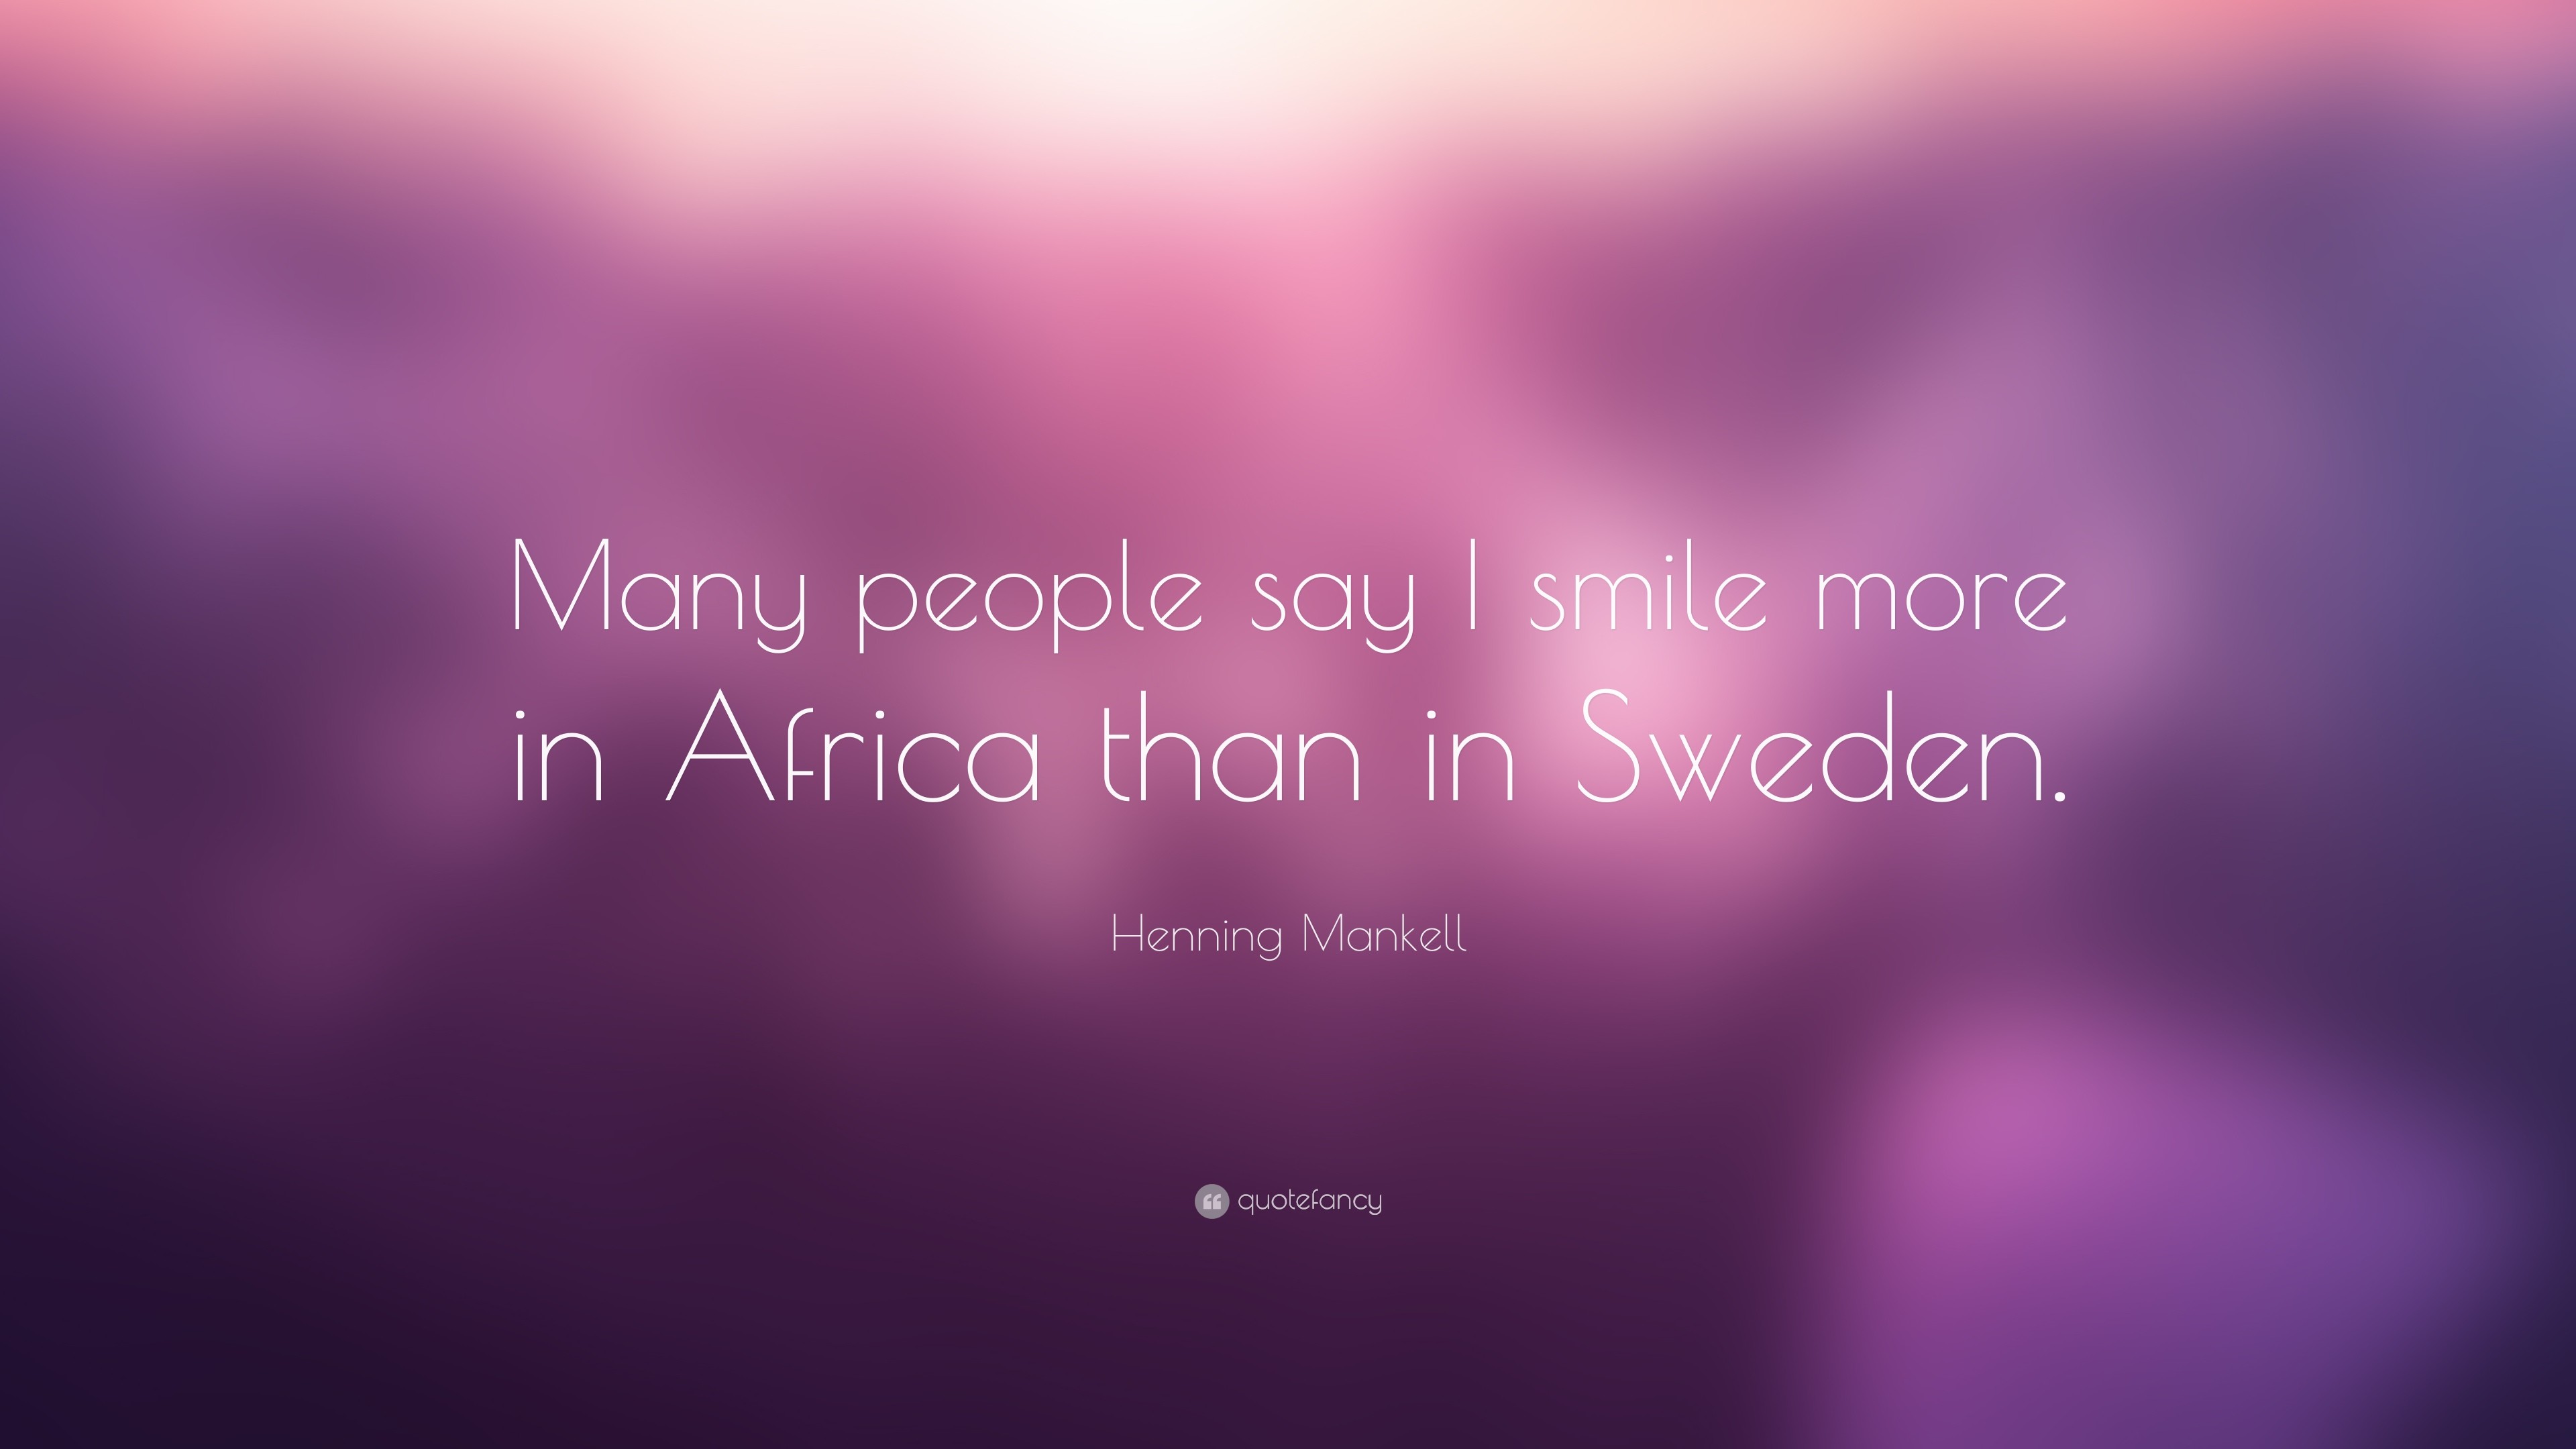 3840x2160 Henning Mankell Quote: “Many people say I smile more in Africa than in  Sweden